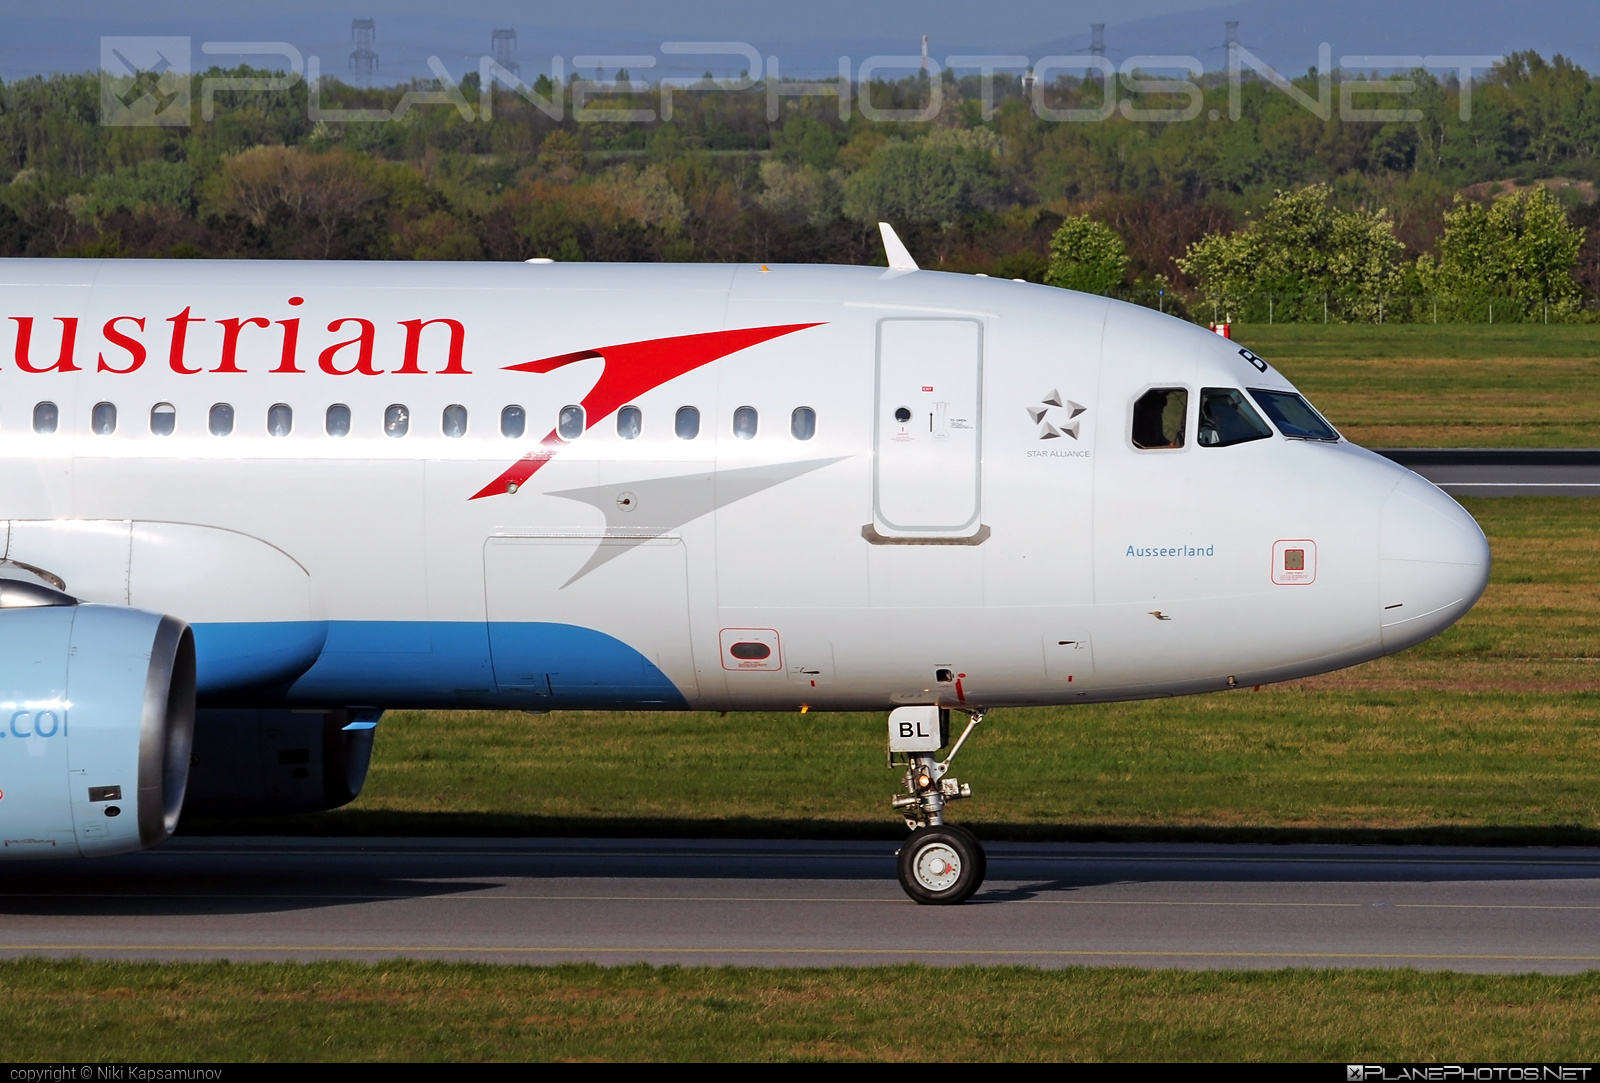 Airbus A320-214 - OE-LBL operated by Austrian Airlines #a320 #a320family #airbus #airbus320 #austrian #austrianAirlines